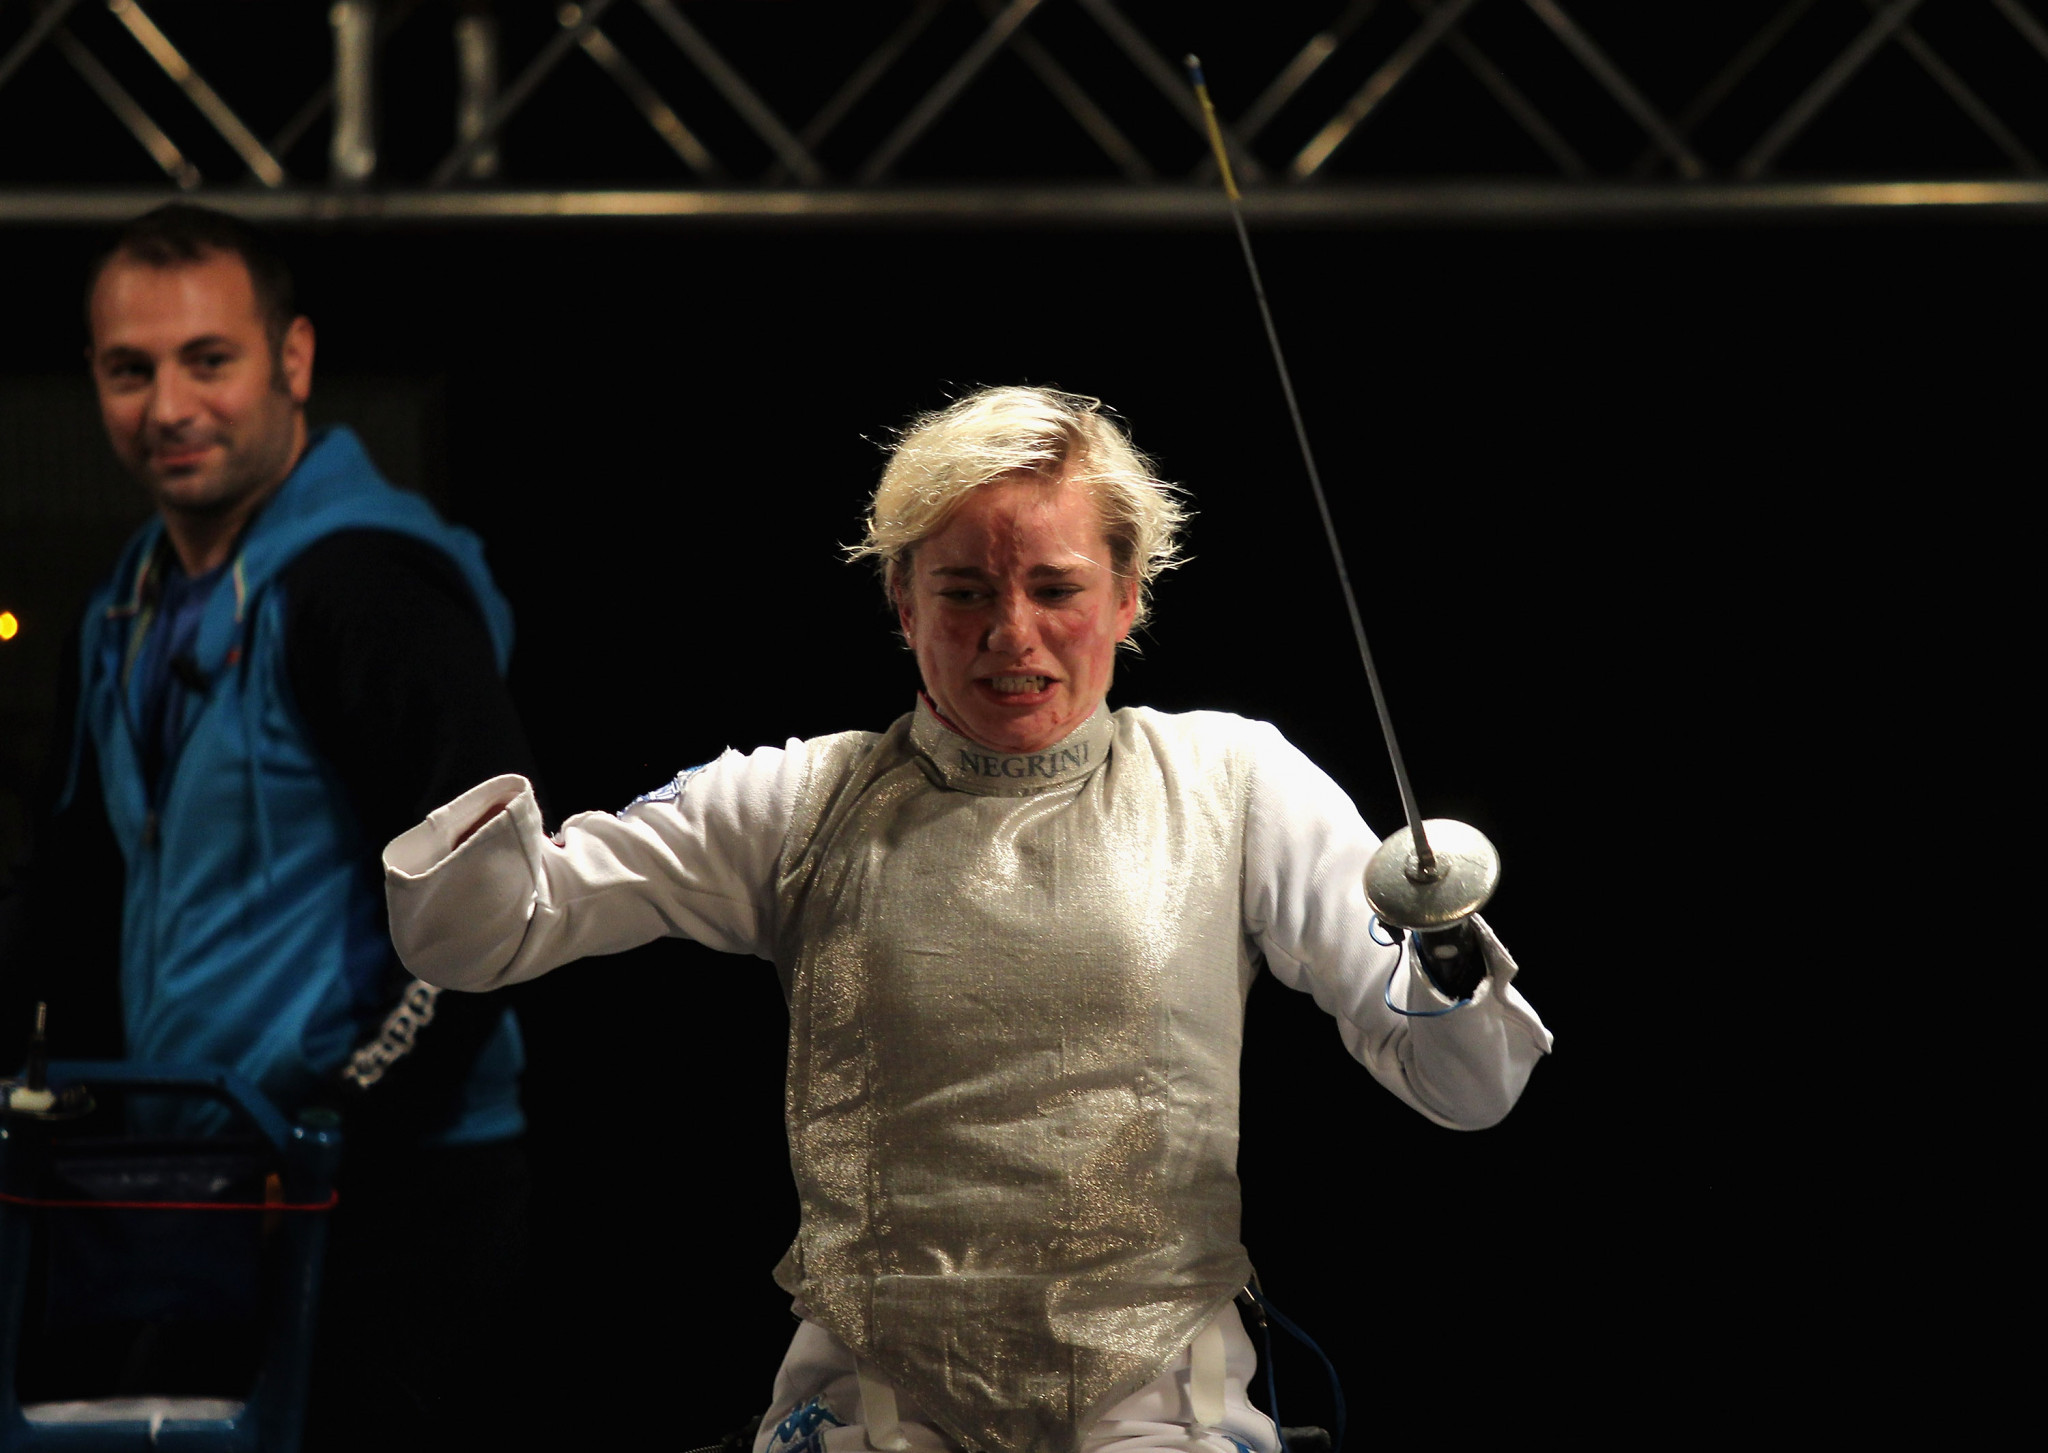 Italy's Beatrice Vio successfully defended her foil B title ©Getty Images